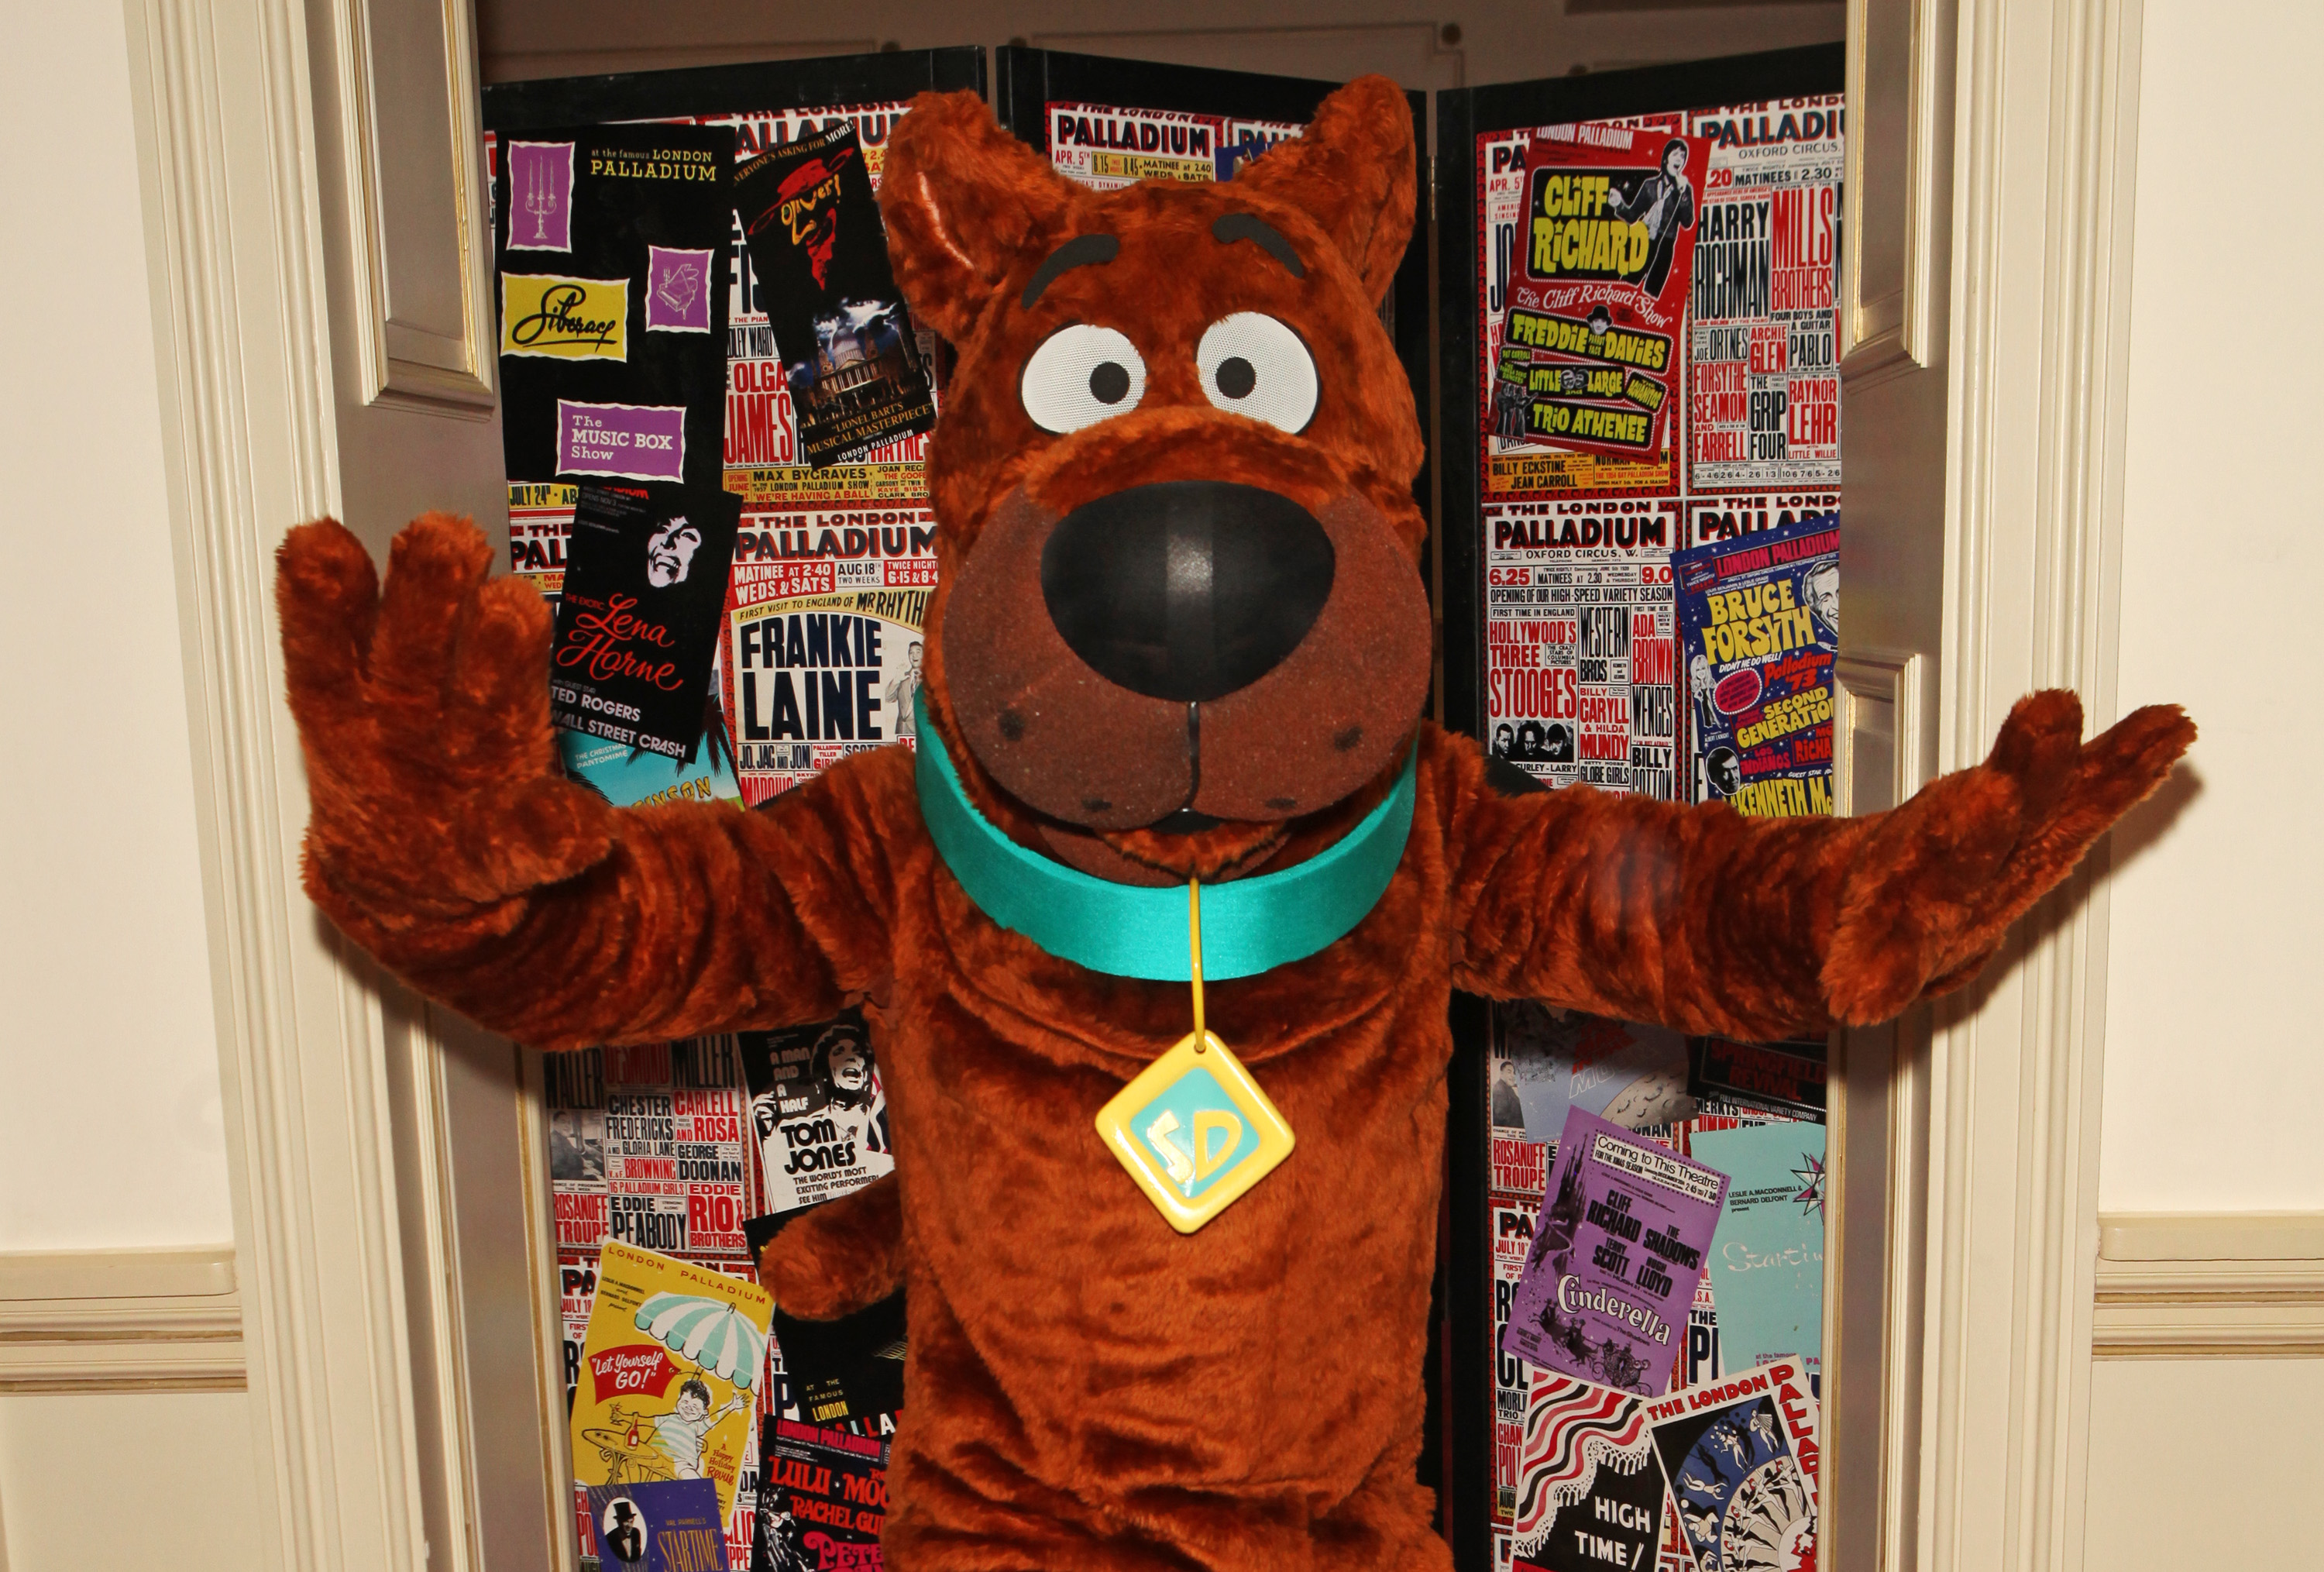 Someone in a Scooby-Doo costume